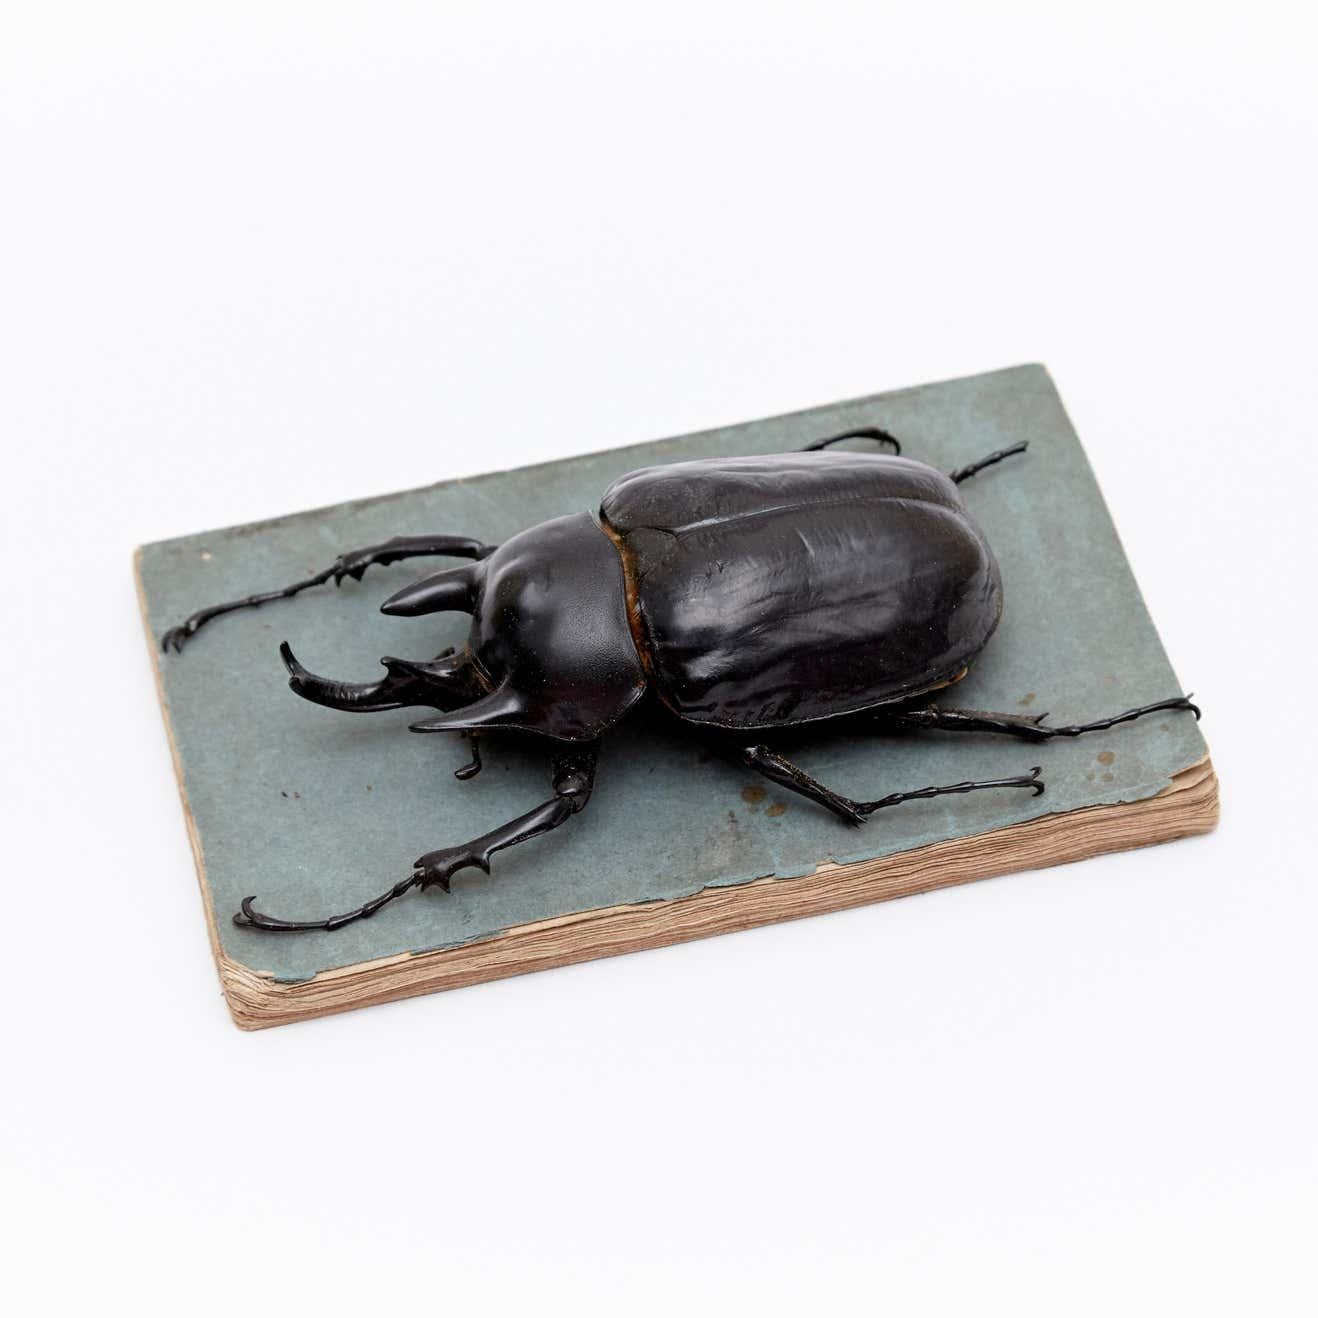 Minimalism contemporary art still life

Protection, 2017
Taxidermy, note book 

Measures: 2 × 5 9/10 × 3 7/10 in
5 × 15 × 9.5 cm

By Sandro made in Berlin in 2017.

